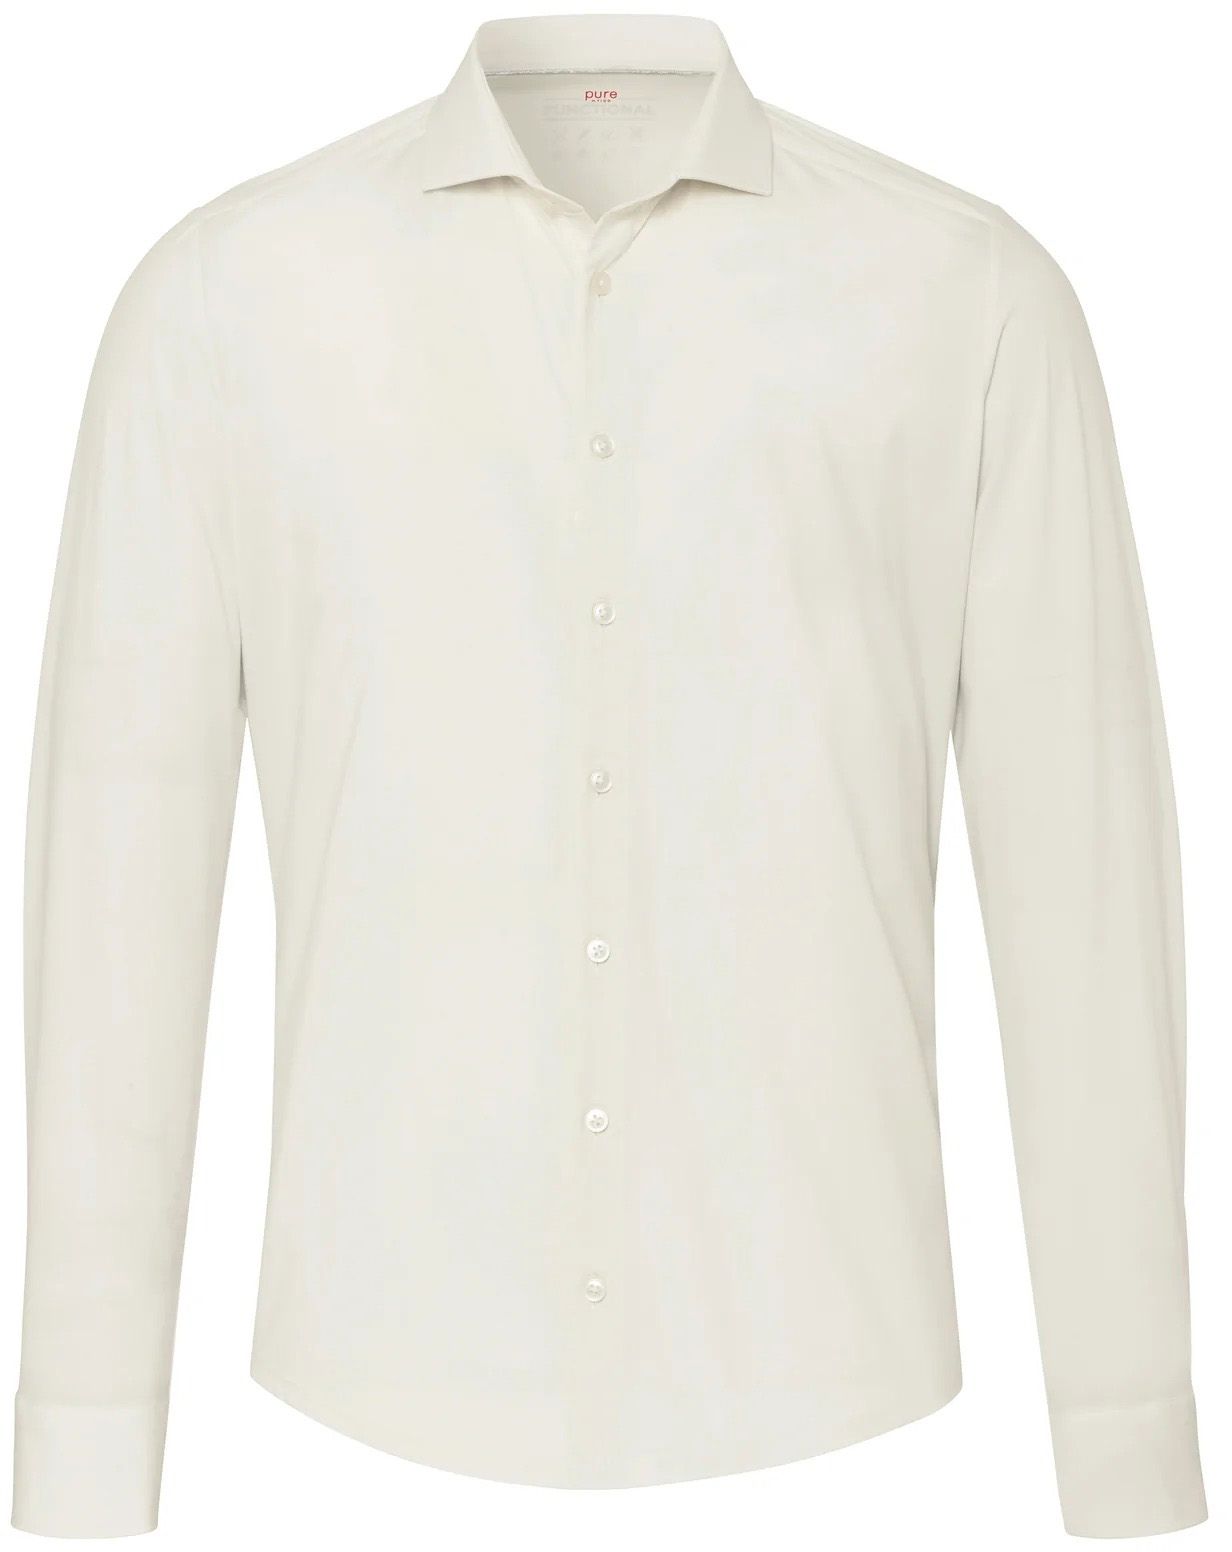 Pure The Functional Shirt Ecru White Off-White size 15